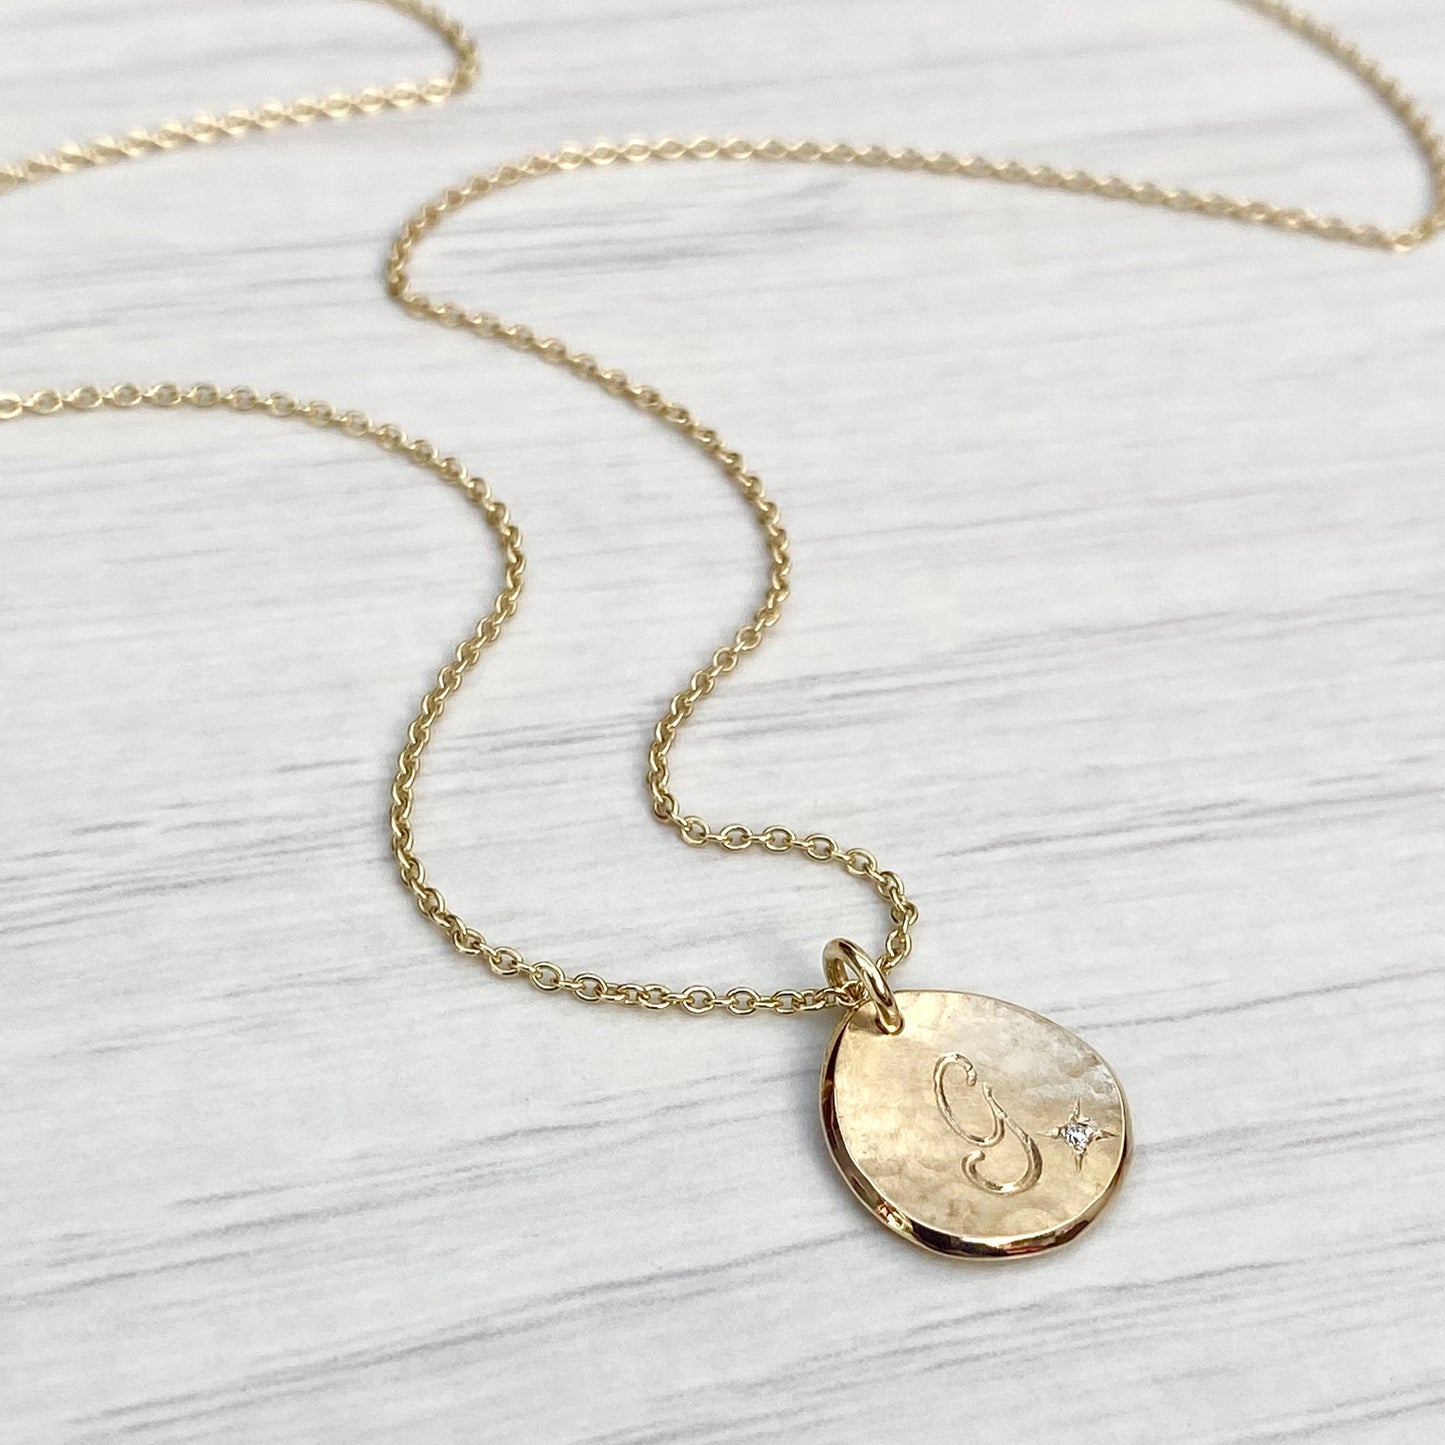 Handmade to order - 9ct solid yellow gold 13mm diamond petal charm pendant on a 1.2mm wide trace chain - Personalised with any letter